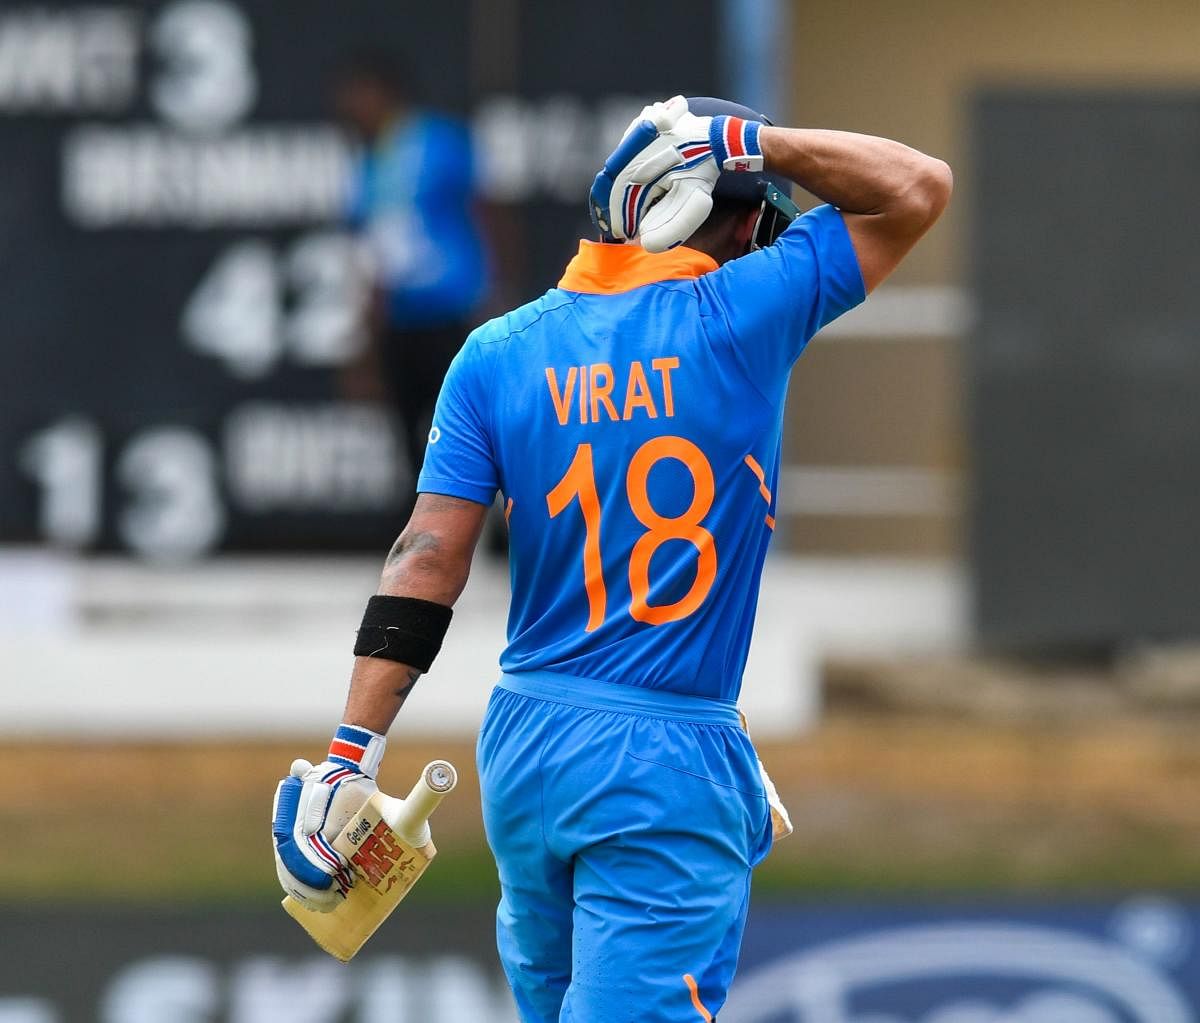 Virat Kohli celebrates his century during the second ODI match between West Indies and India. Photo credit: AFP